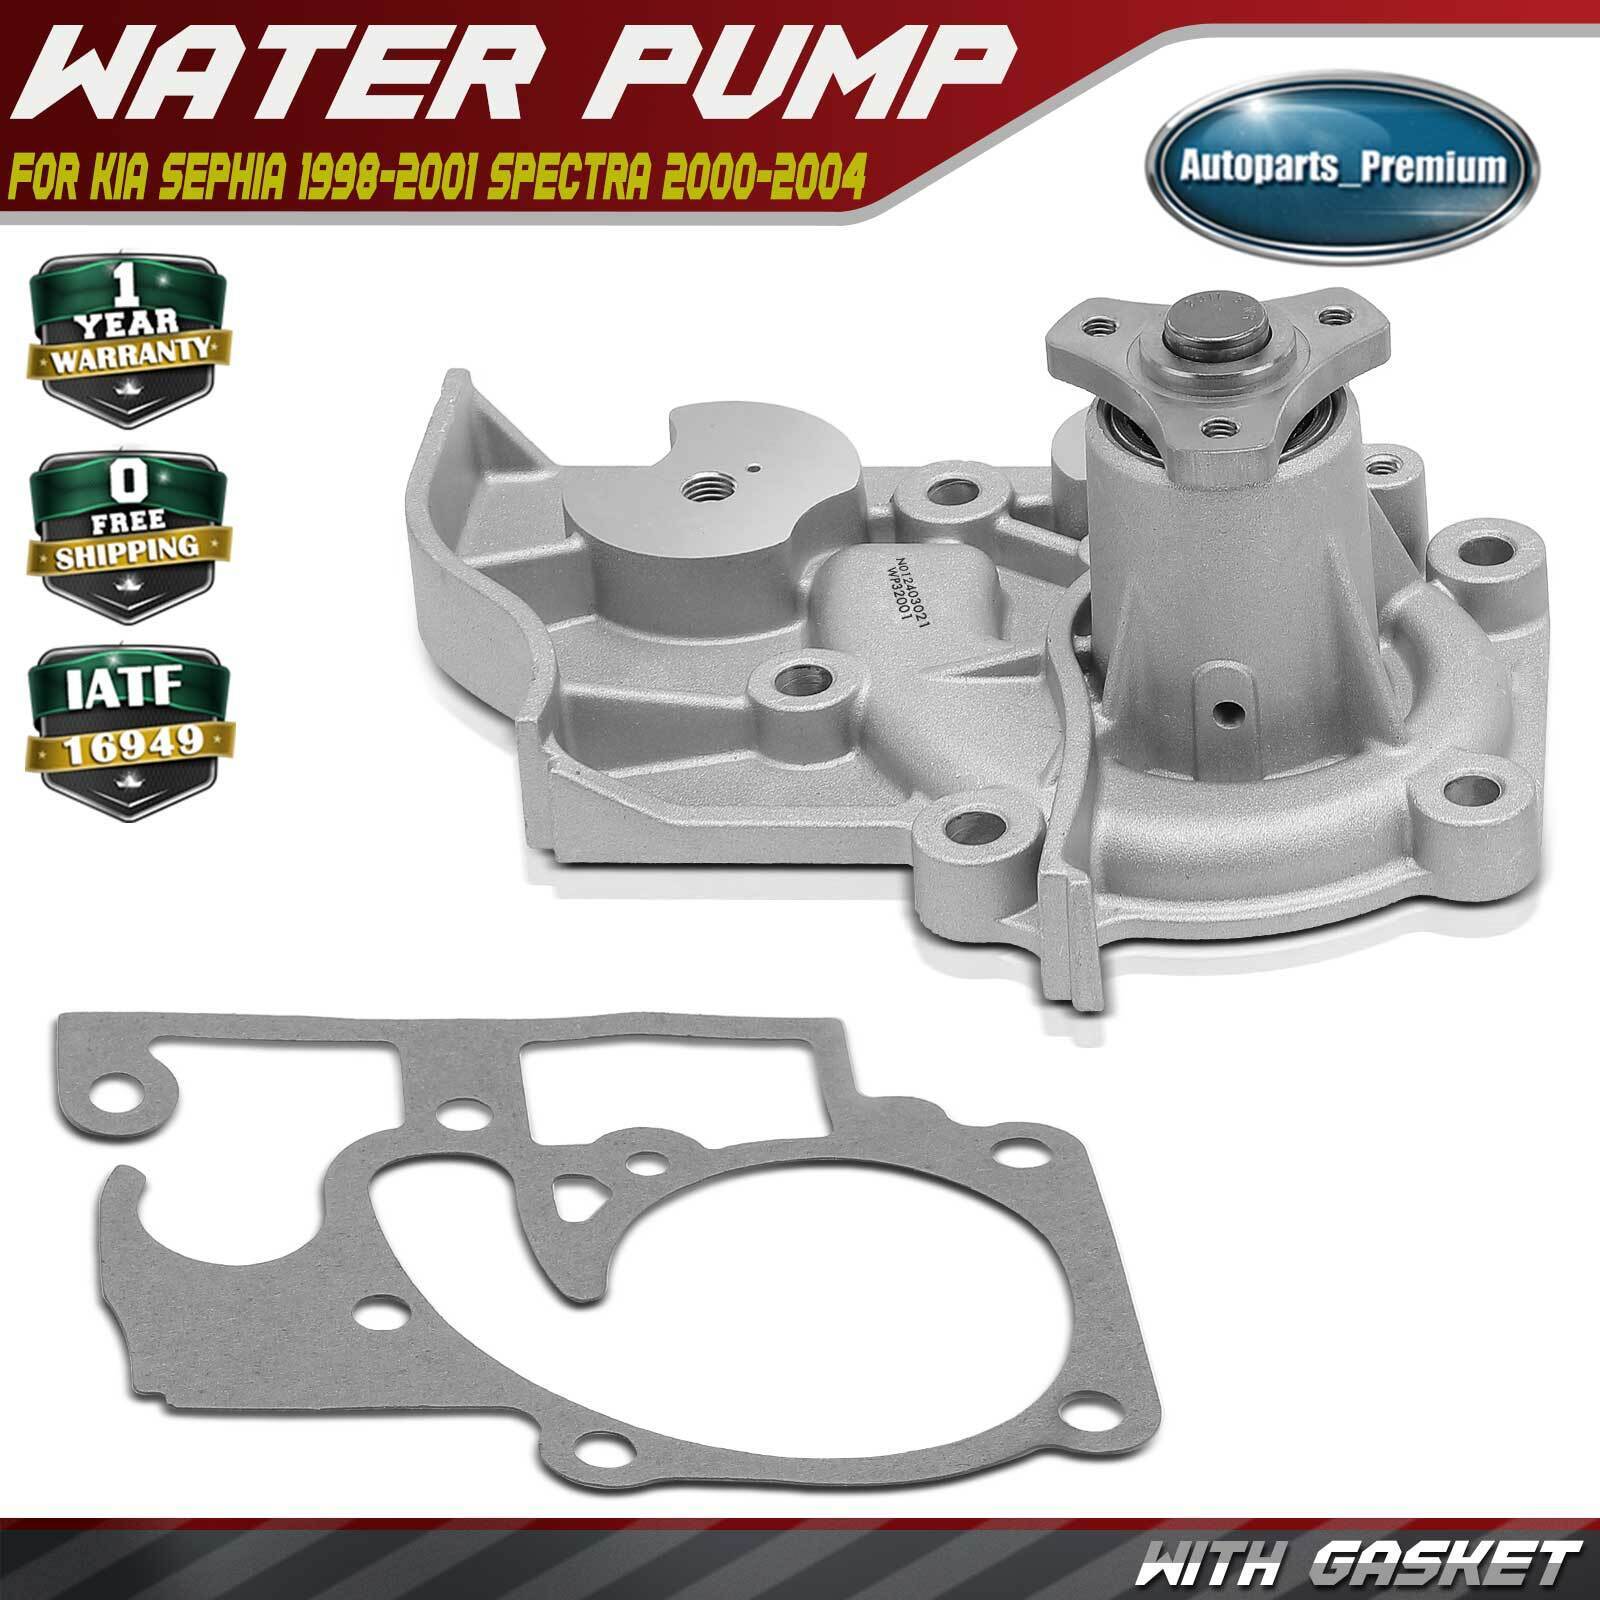 Engine Water Pump with Gasket for Kia Sephia 1998-2001 Spectra 2000-2004 L4 1.8L